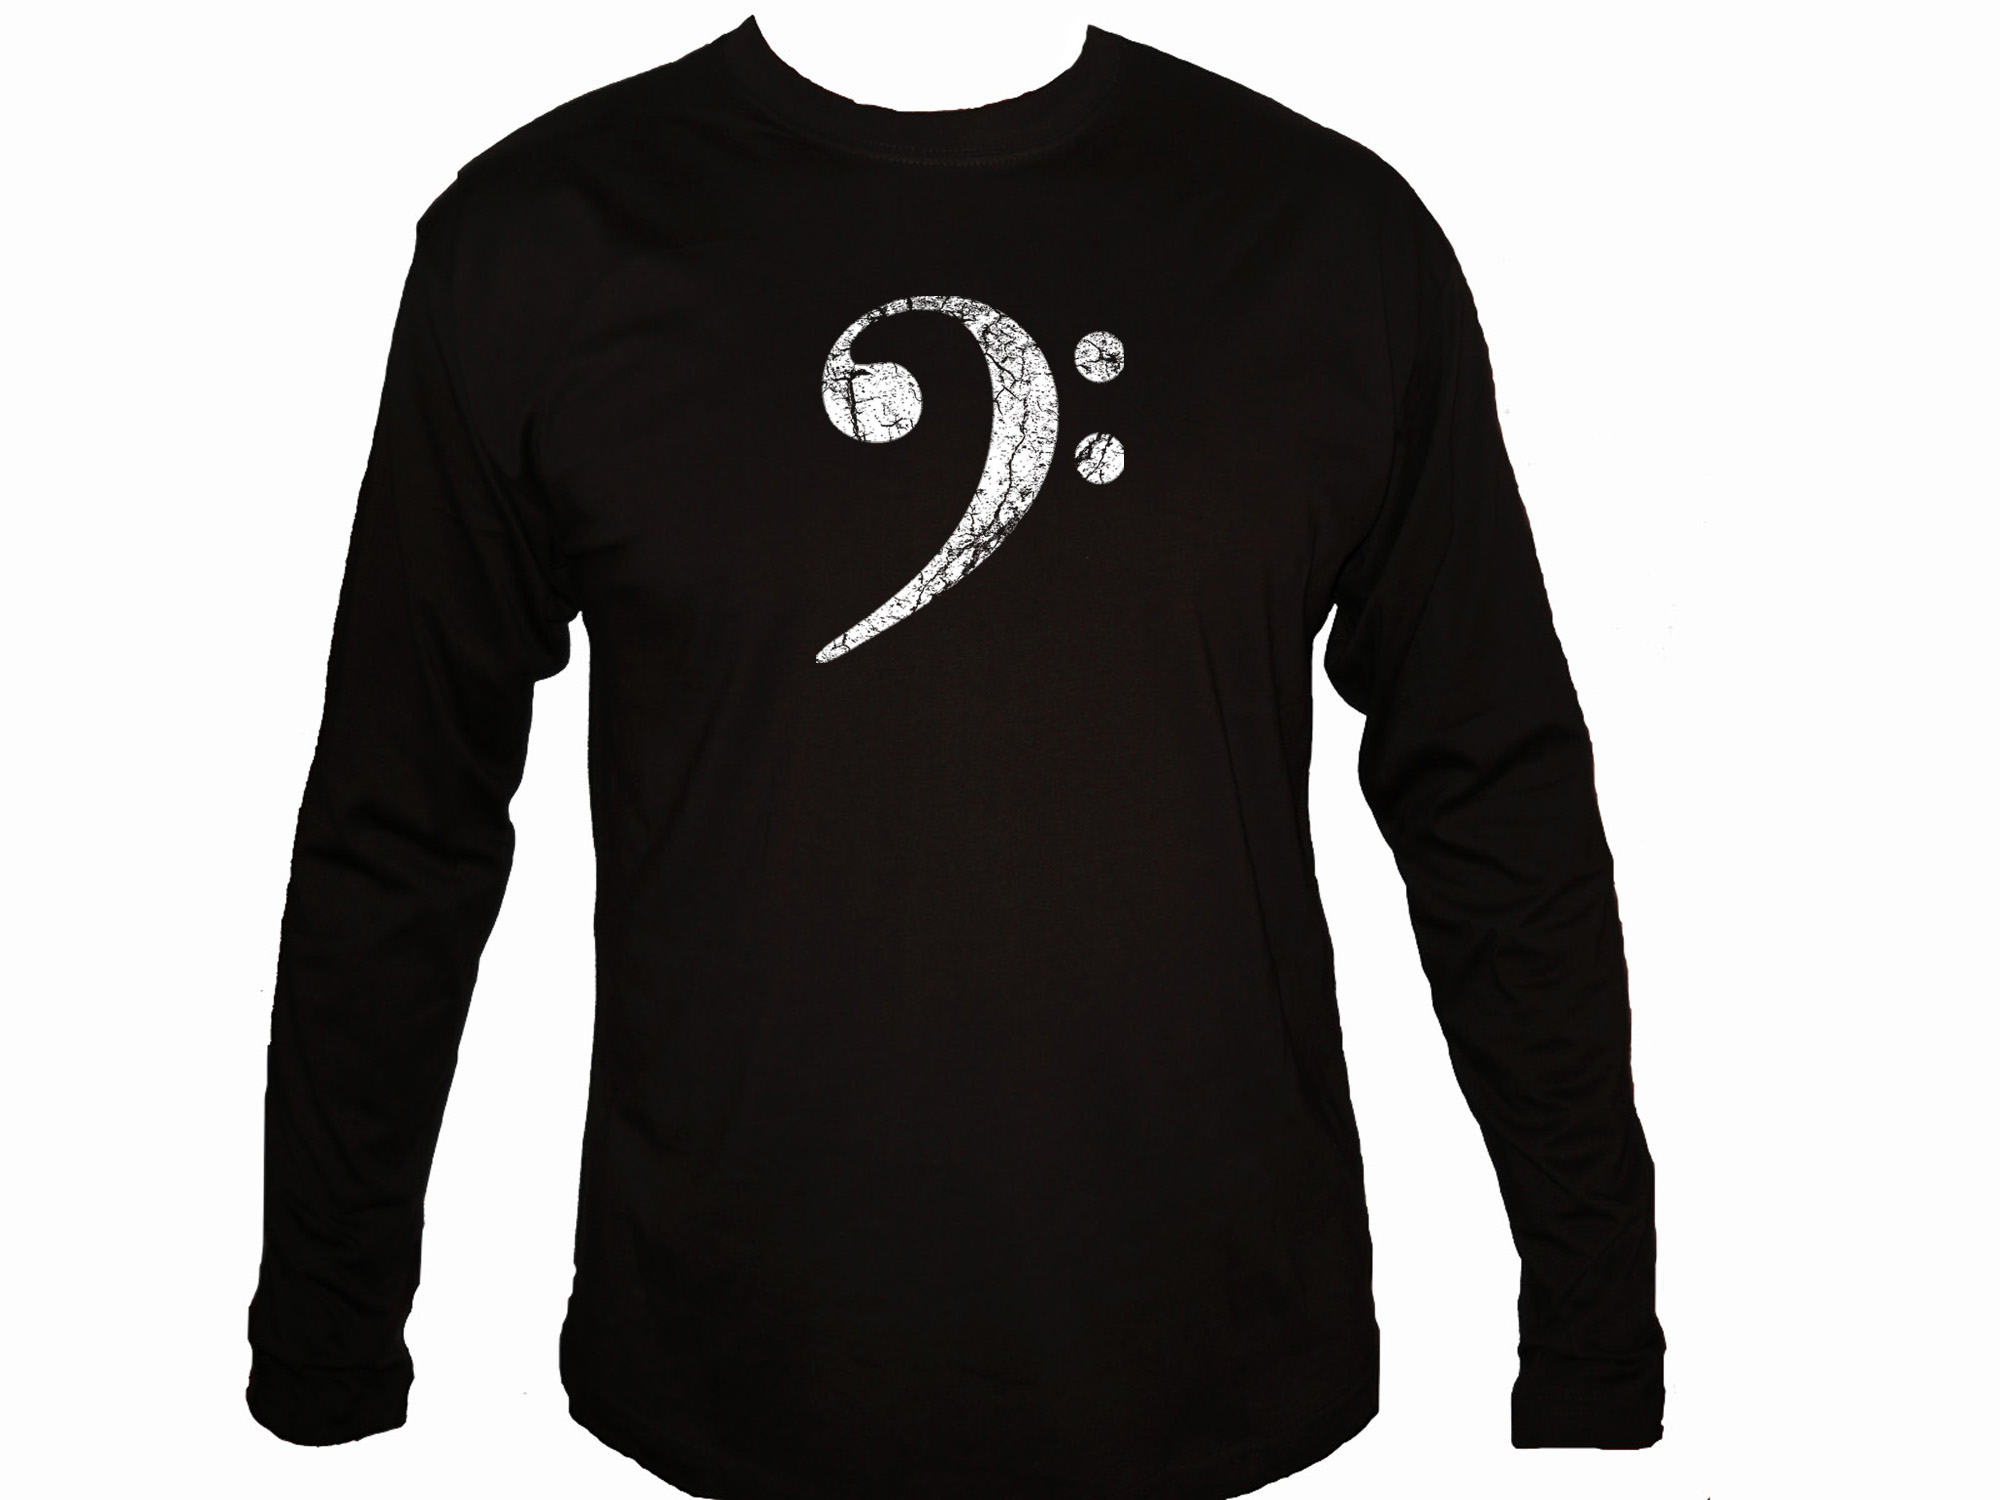 Bass player distressed clef sleeved t-shirt great gift for guitarist